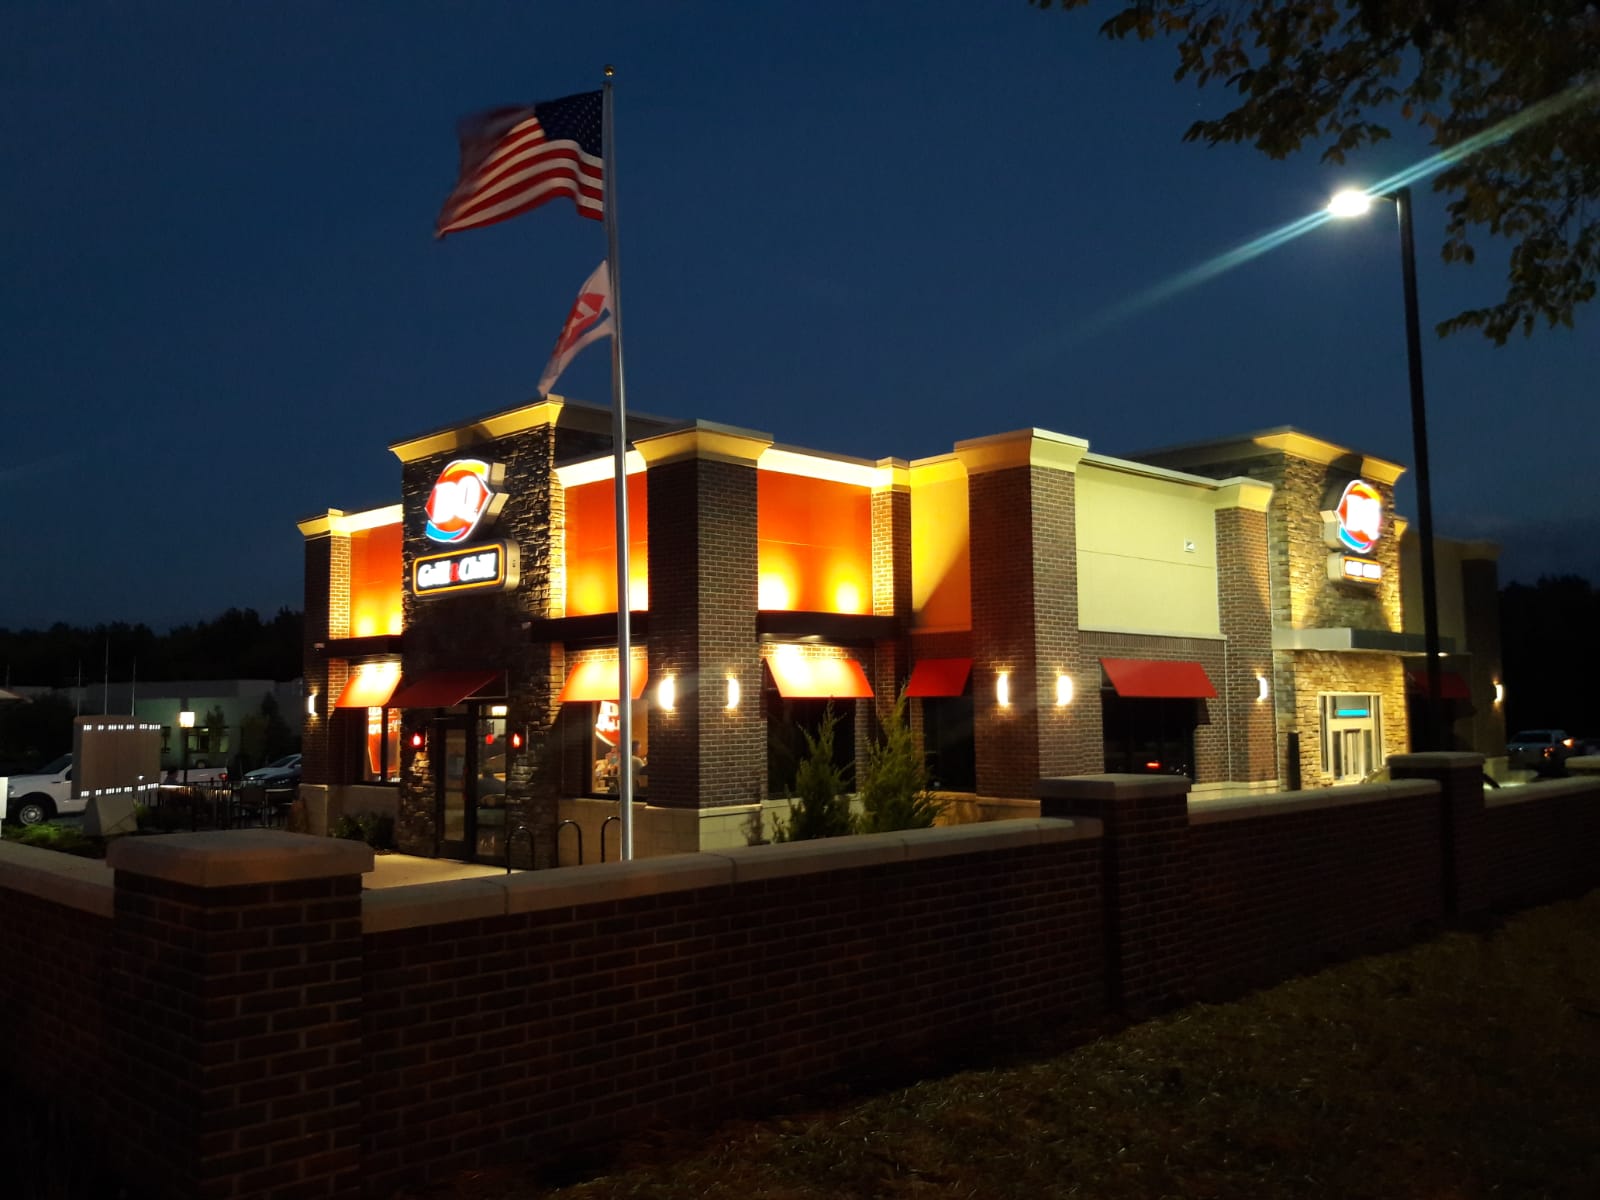 Dairy Queen Franchise building at night with a waving flag